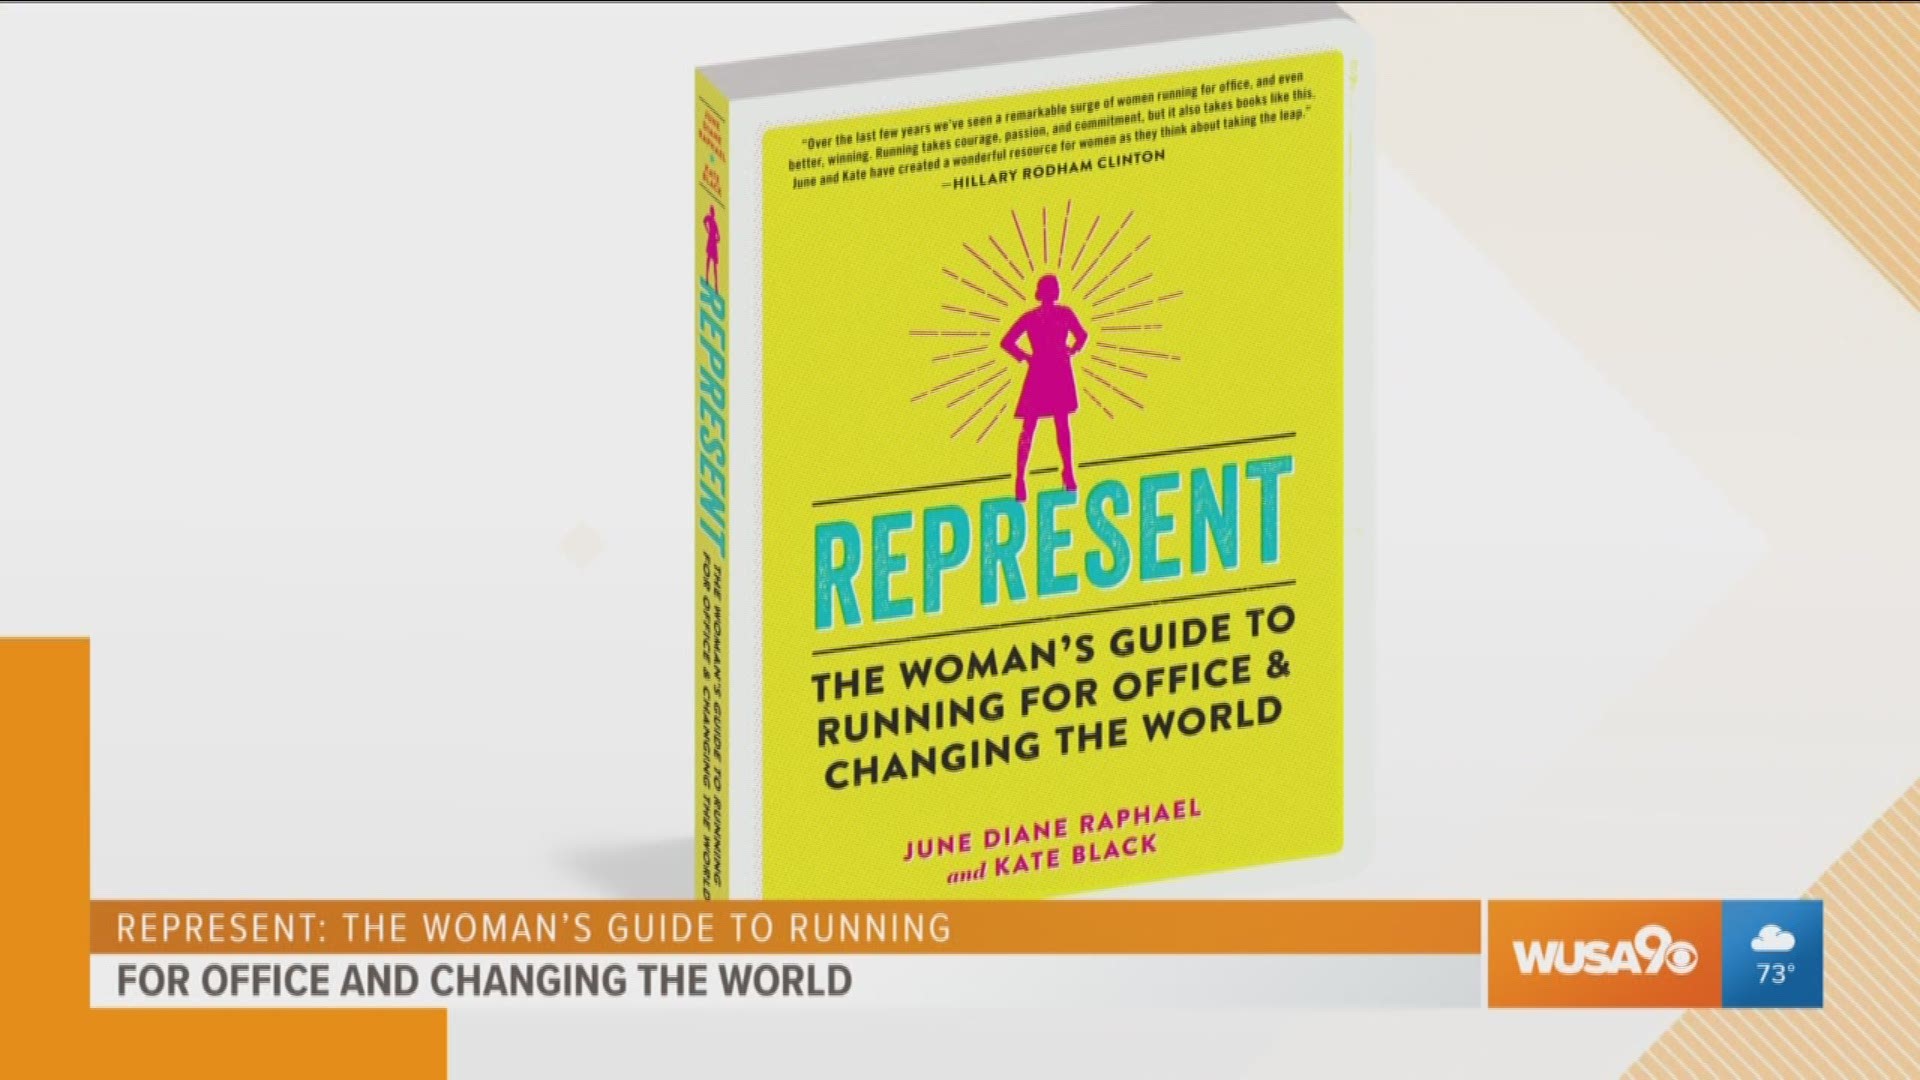 Kate Black, co-author of "Represent: The Woman’s Guide to Running for Office and Changing the World" shares how her book can help any woman run for political office.